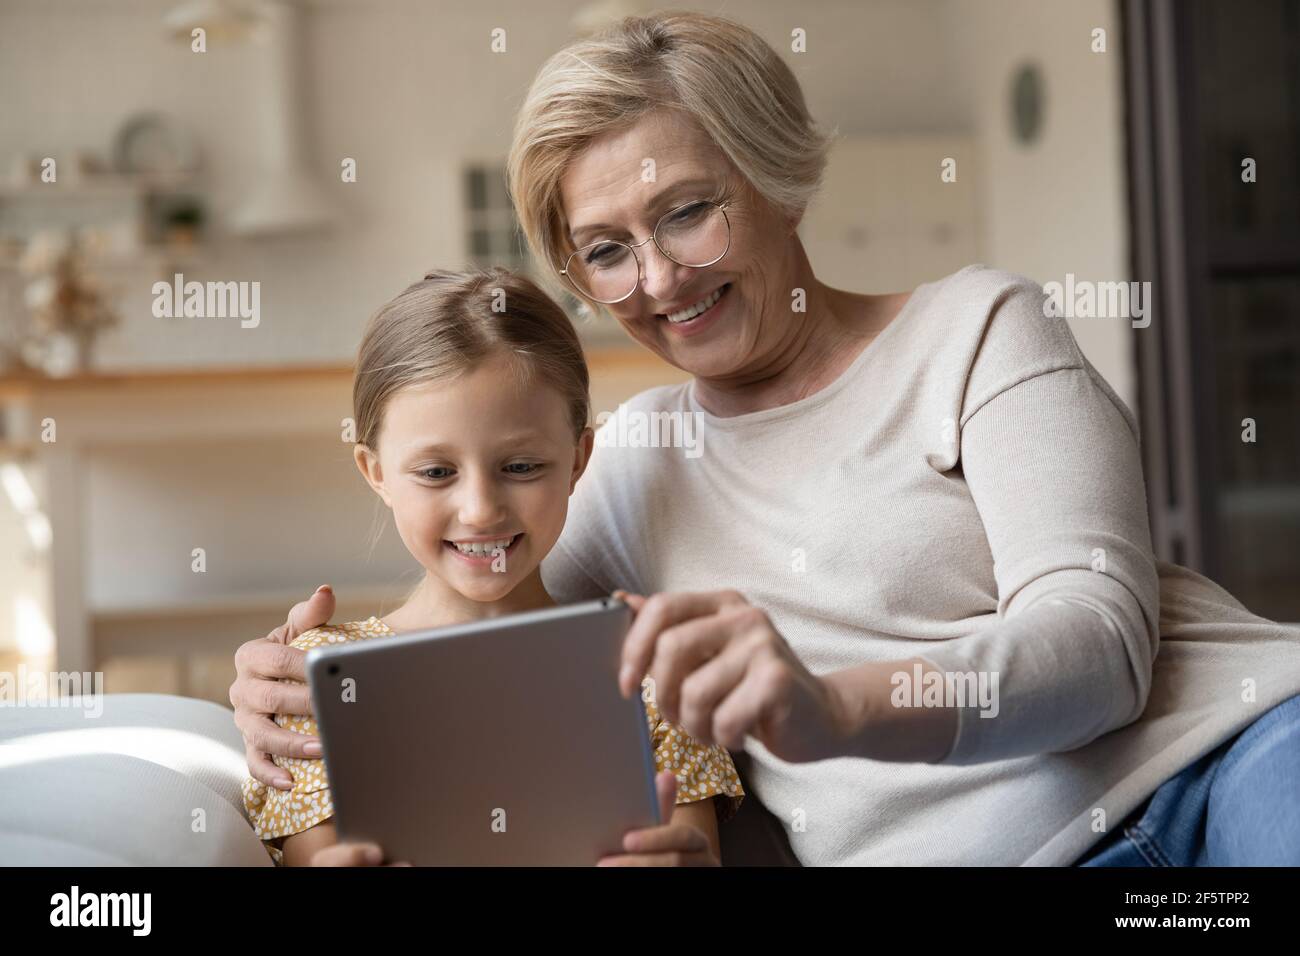 Smiling granny and small granddaughter use tablet Stock Photo